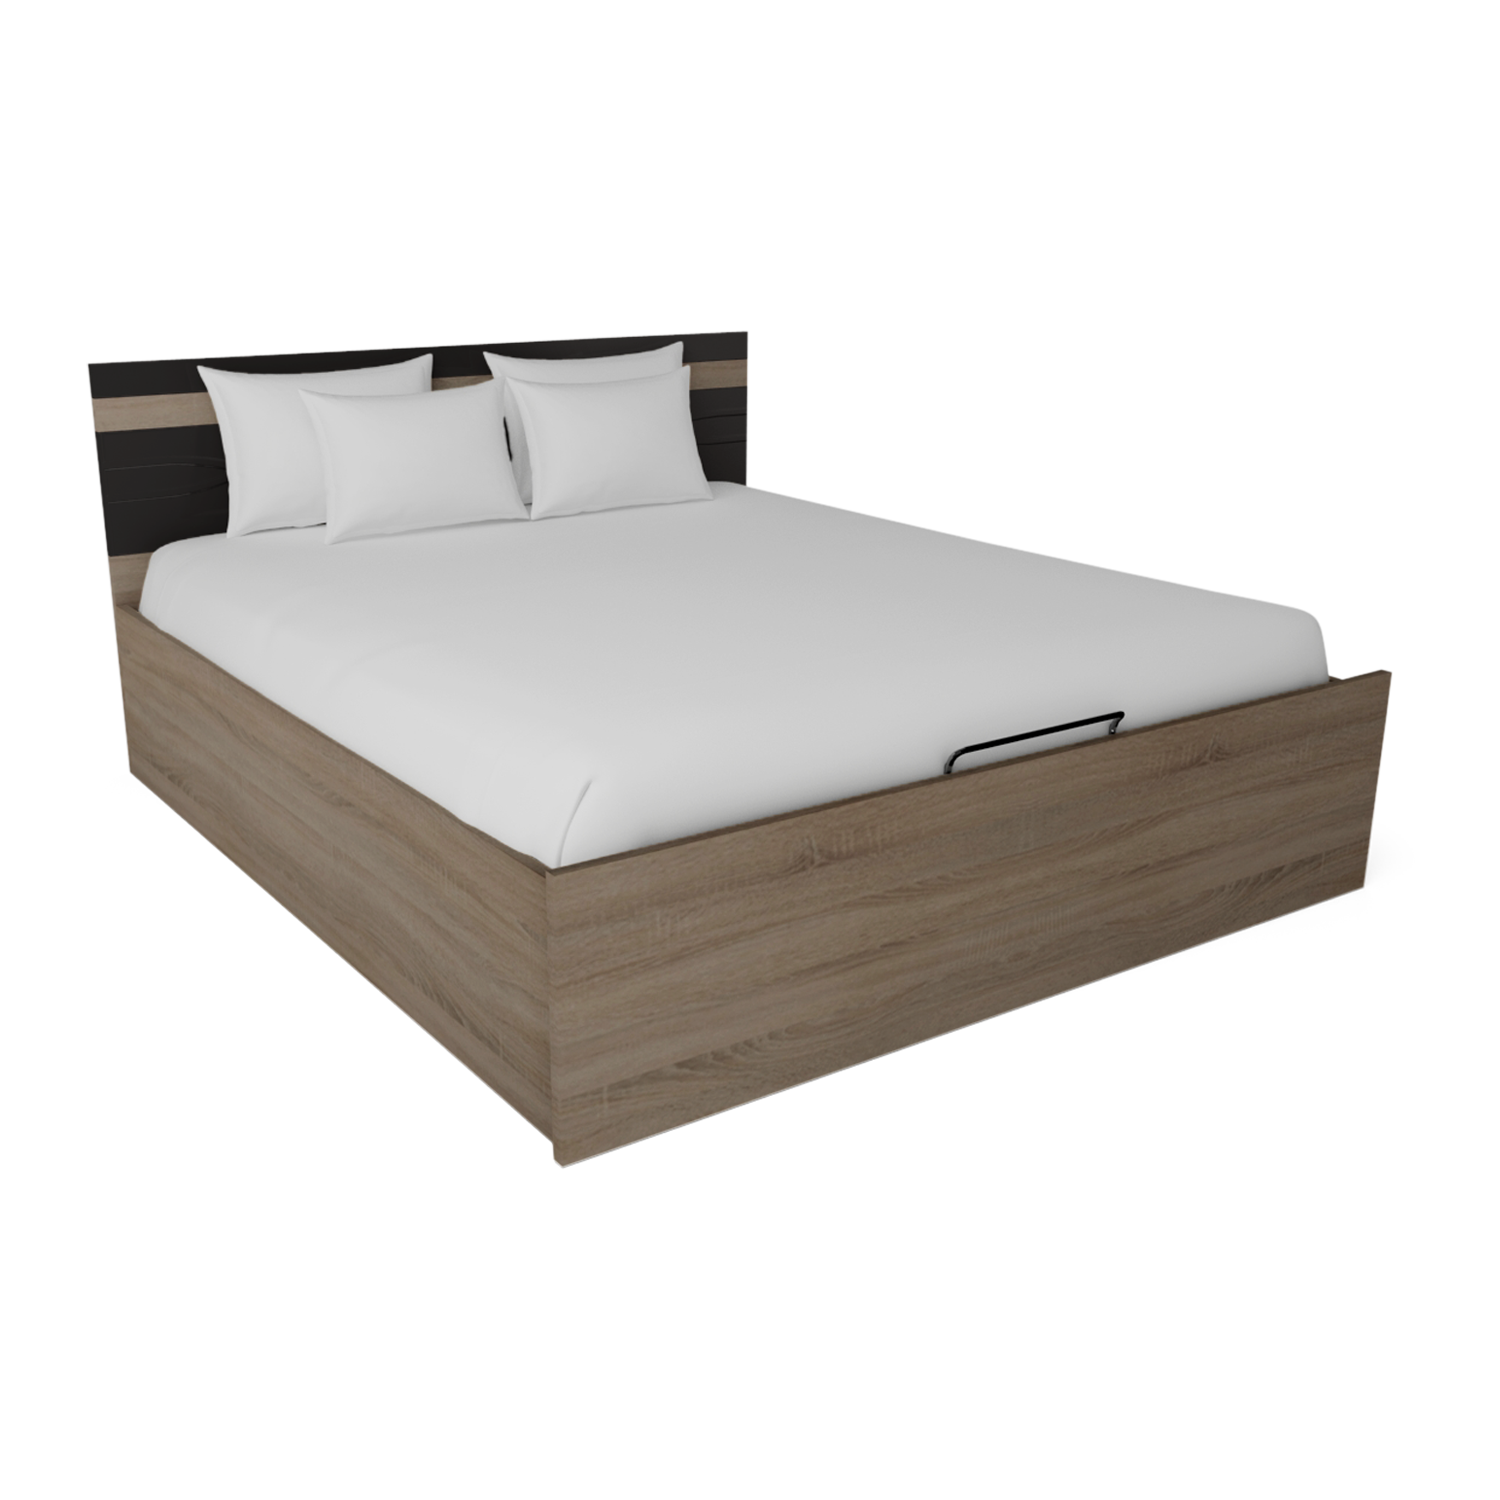 Zen King Size Bed With Hydraulic, King Bed Images